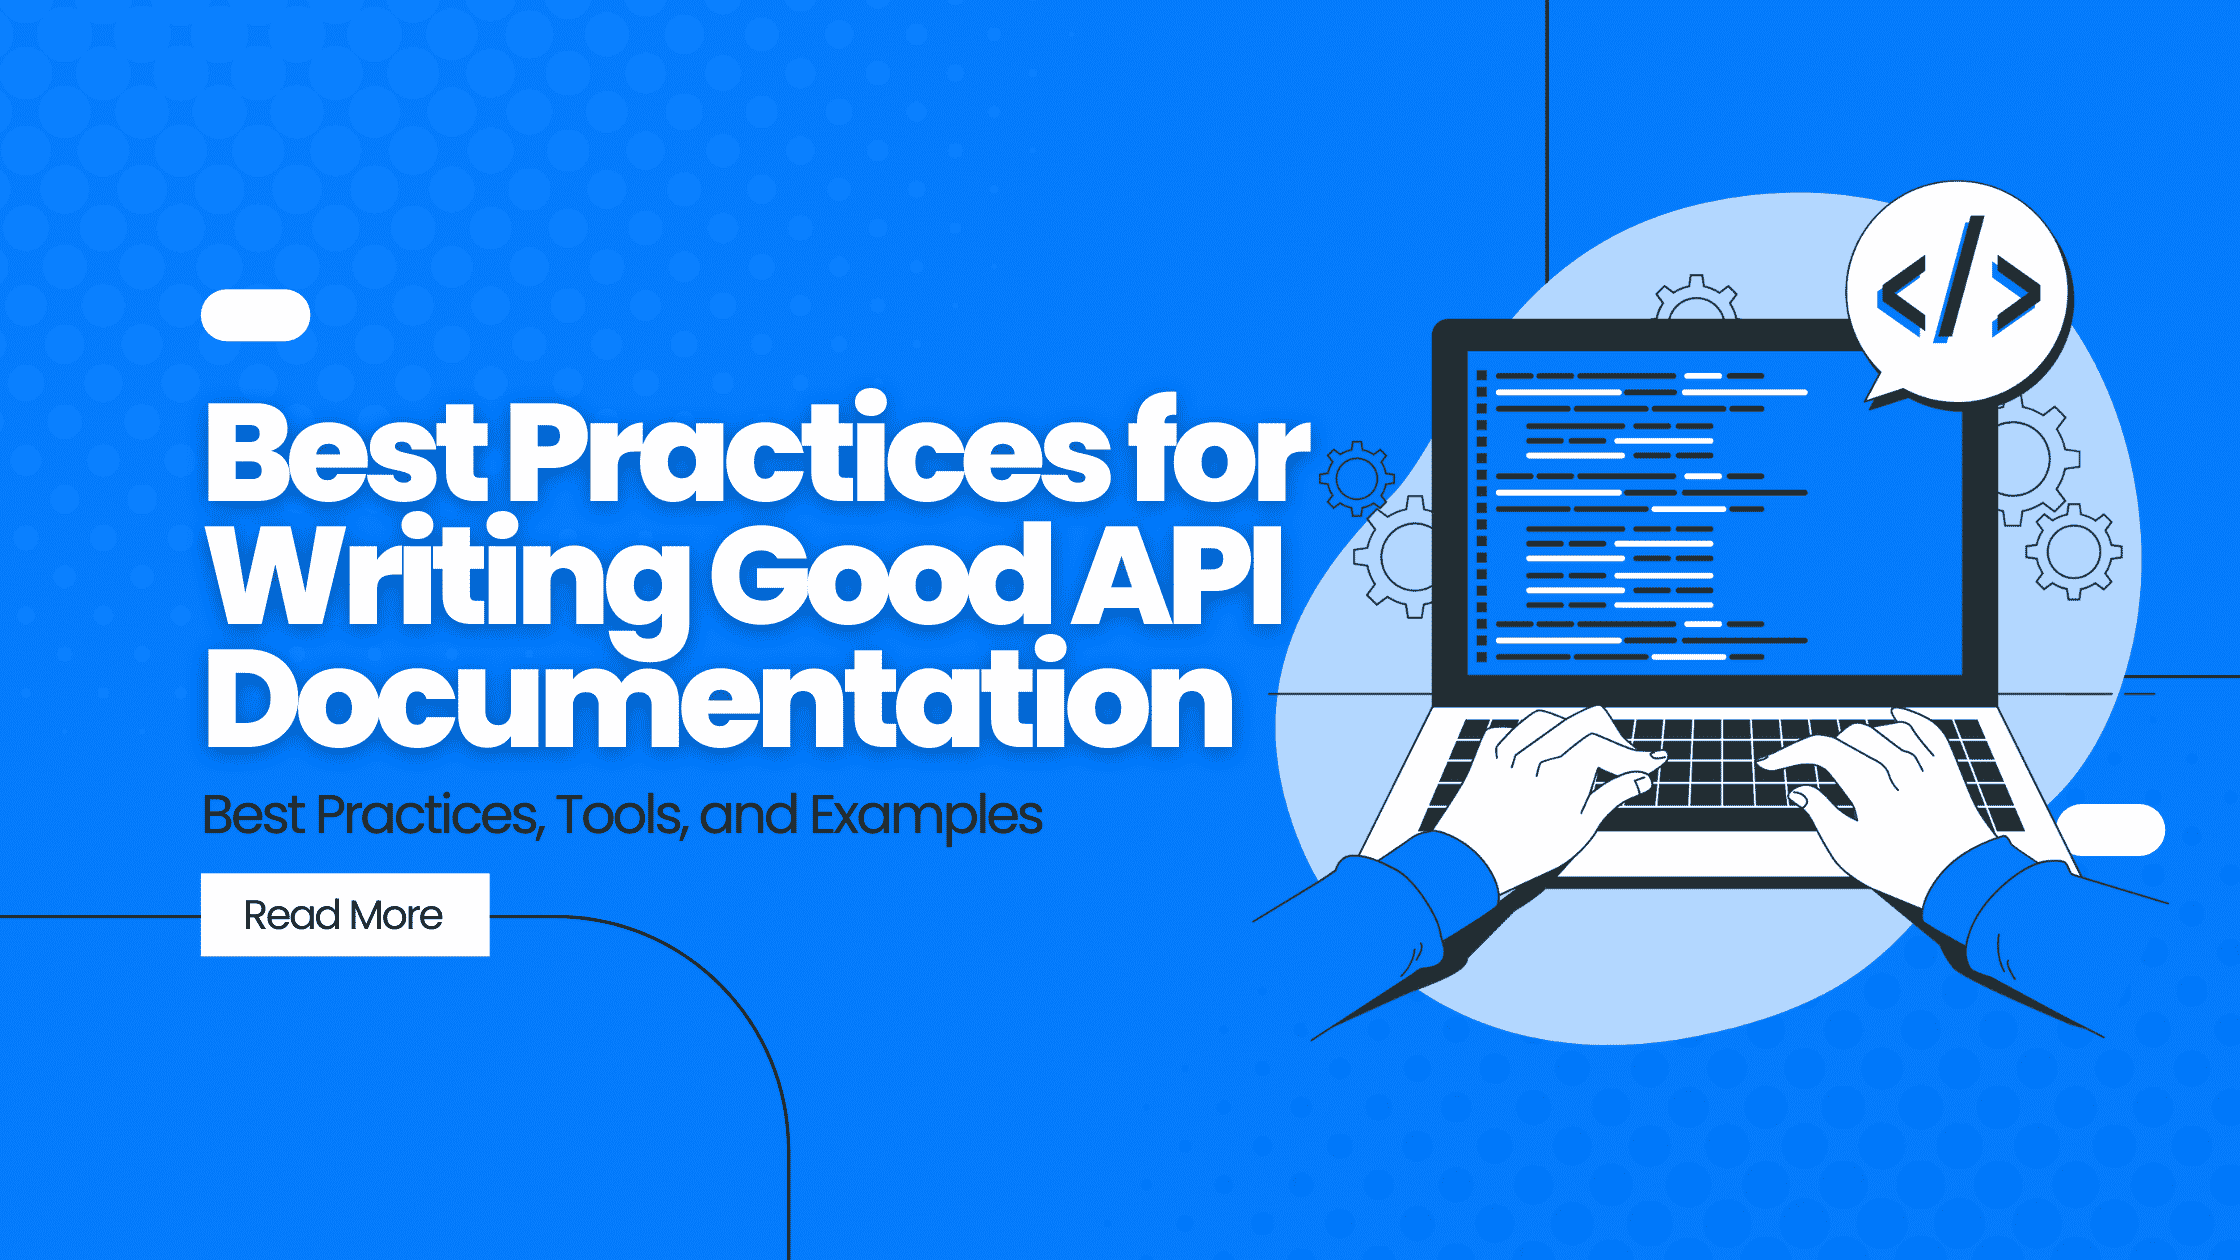 Best Practices for Writing Good API Documentation